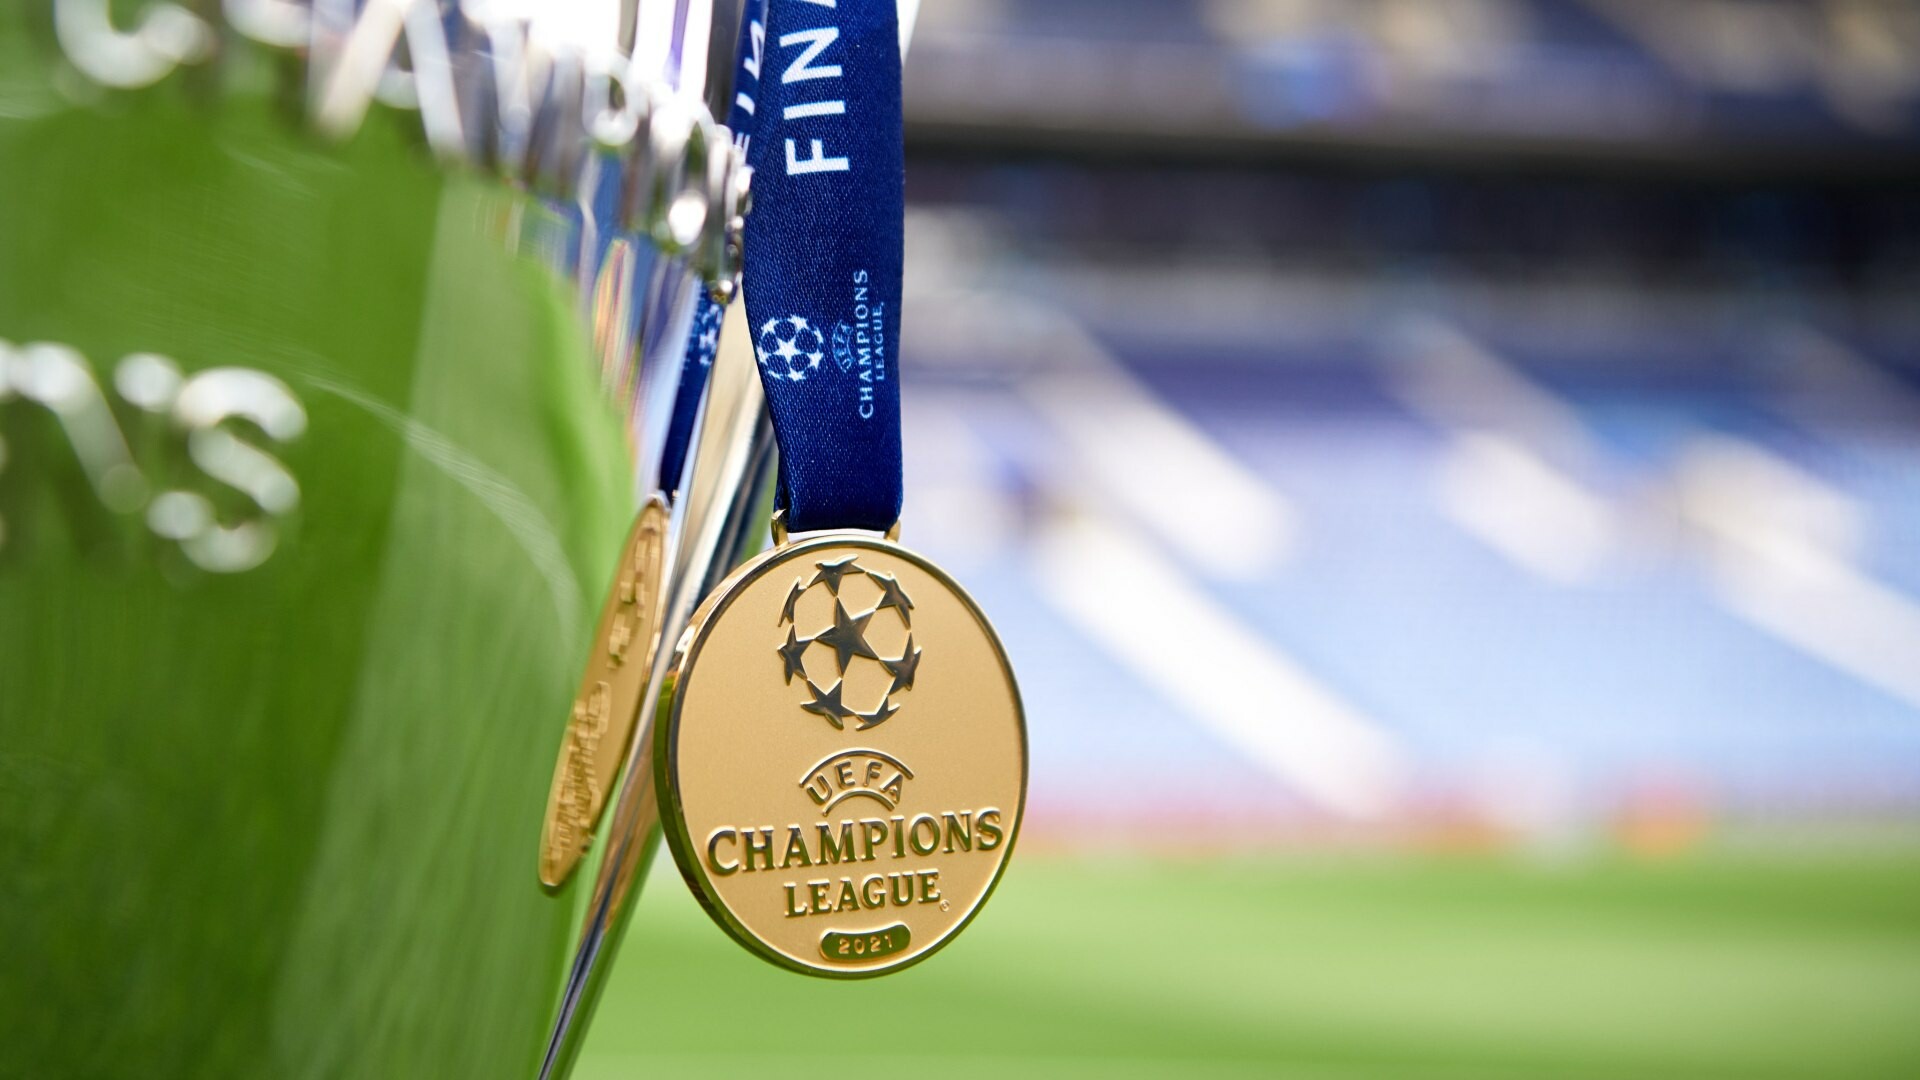 UEFA: The primary association football tournament, Chelsea, Champions League Champions. 1920x1080 Full HD Wallpaper.